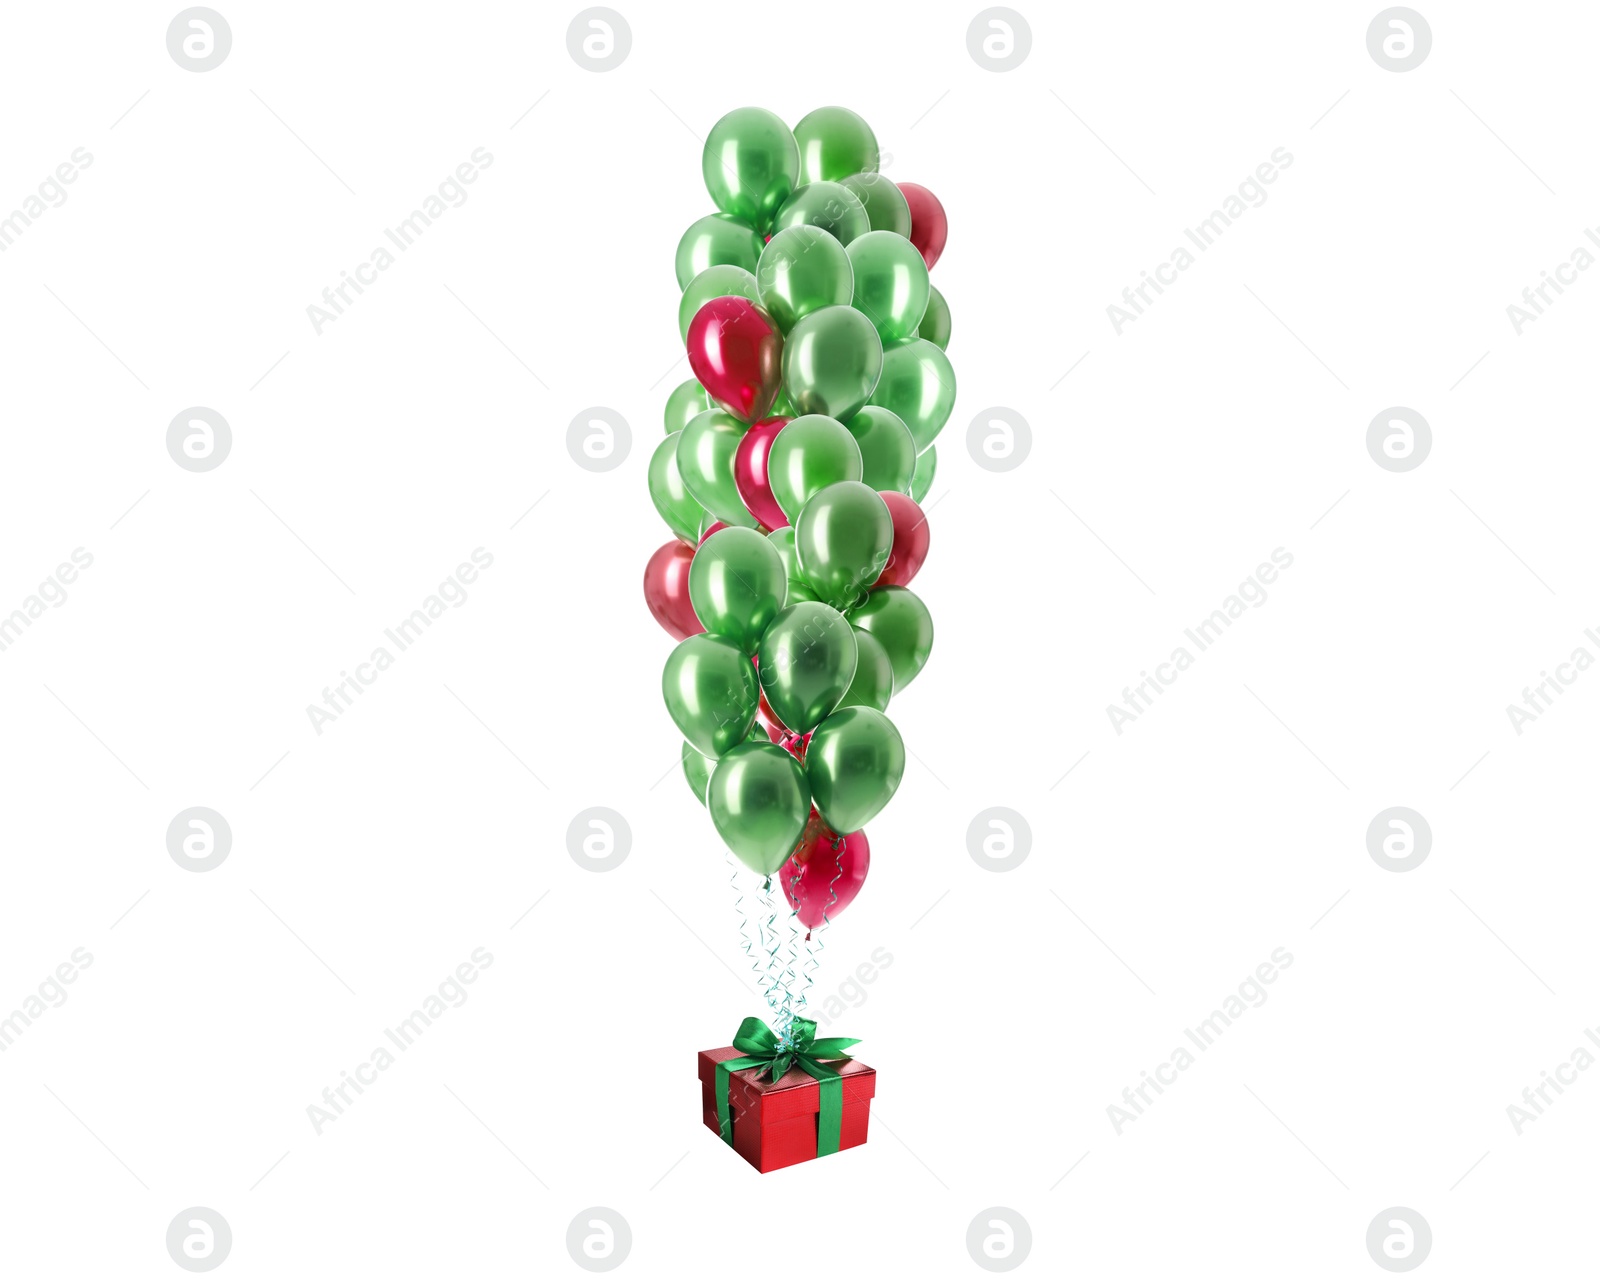 Image of Many balloons tied to gift box on white background